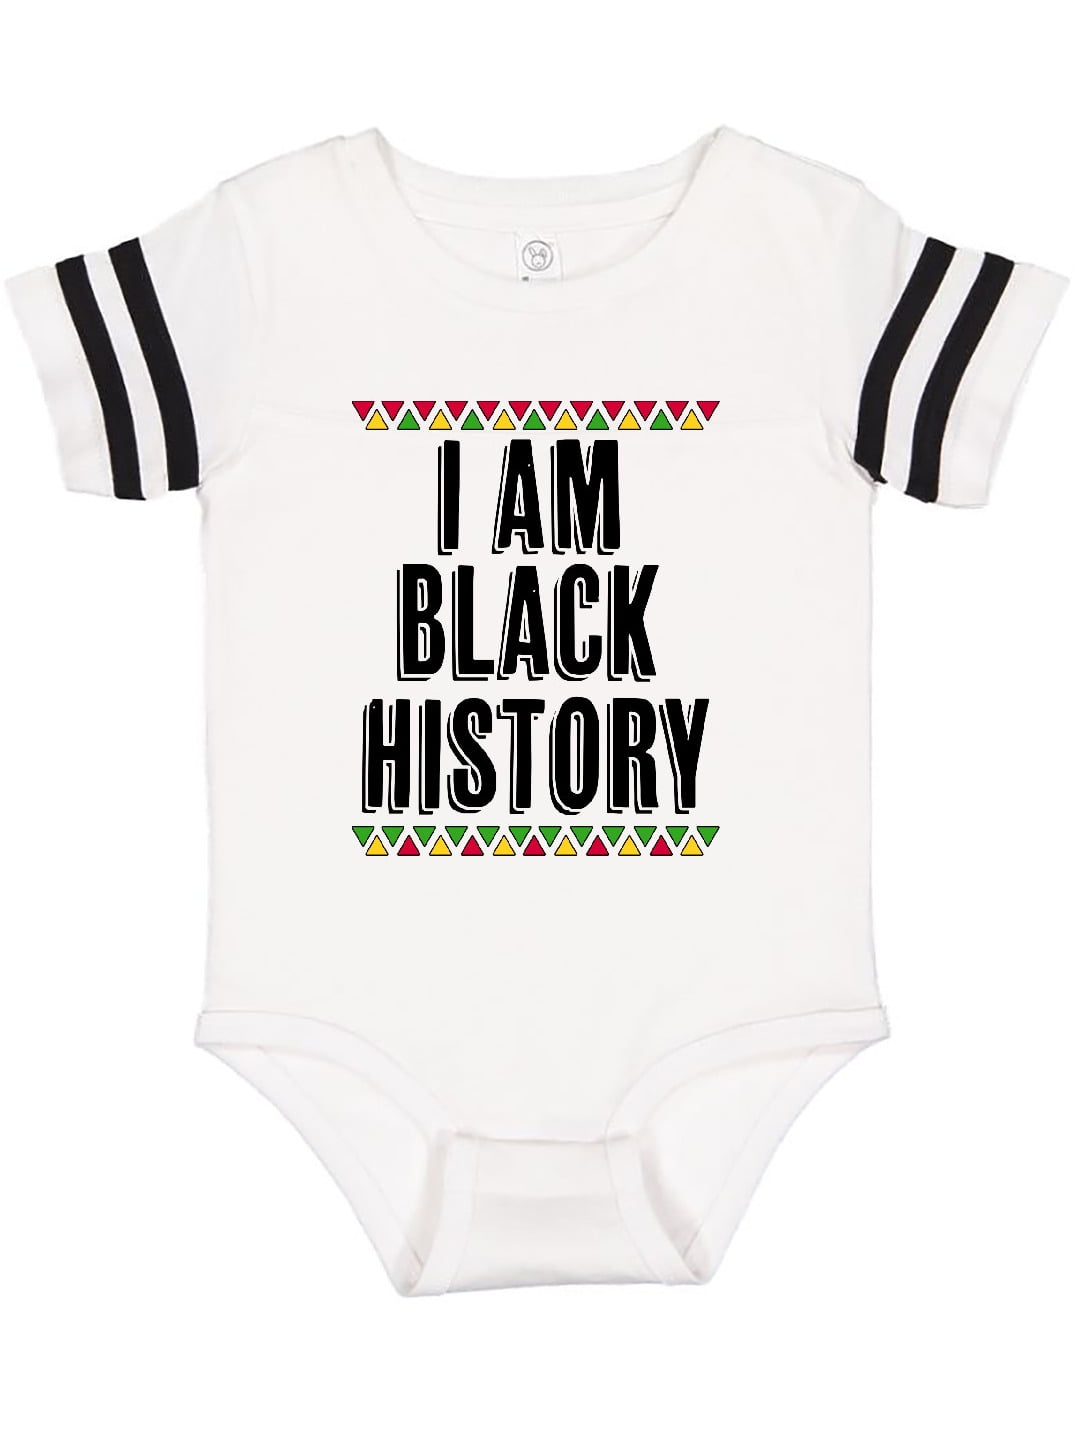 What We Do in The Shadows Newborn Baby Cotton Shortsleeve Bodysuits Jumpsuits Black